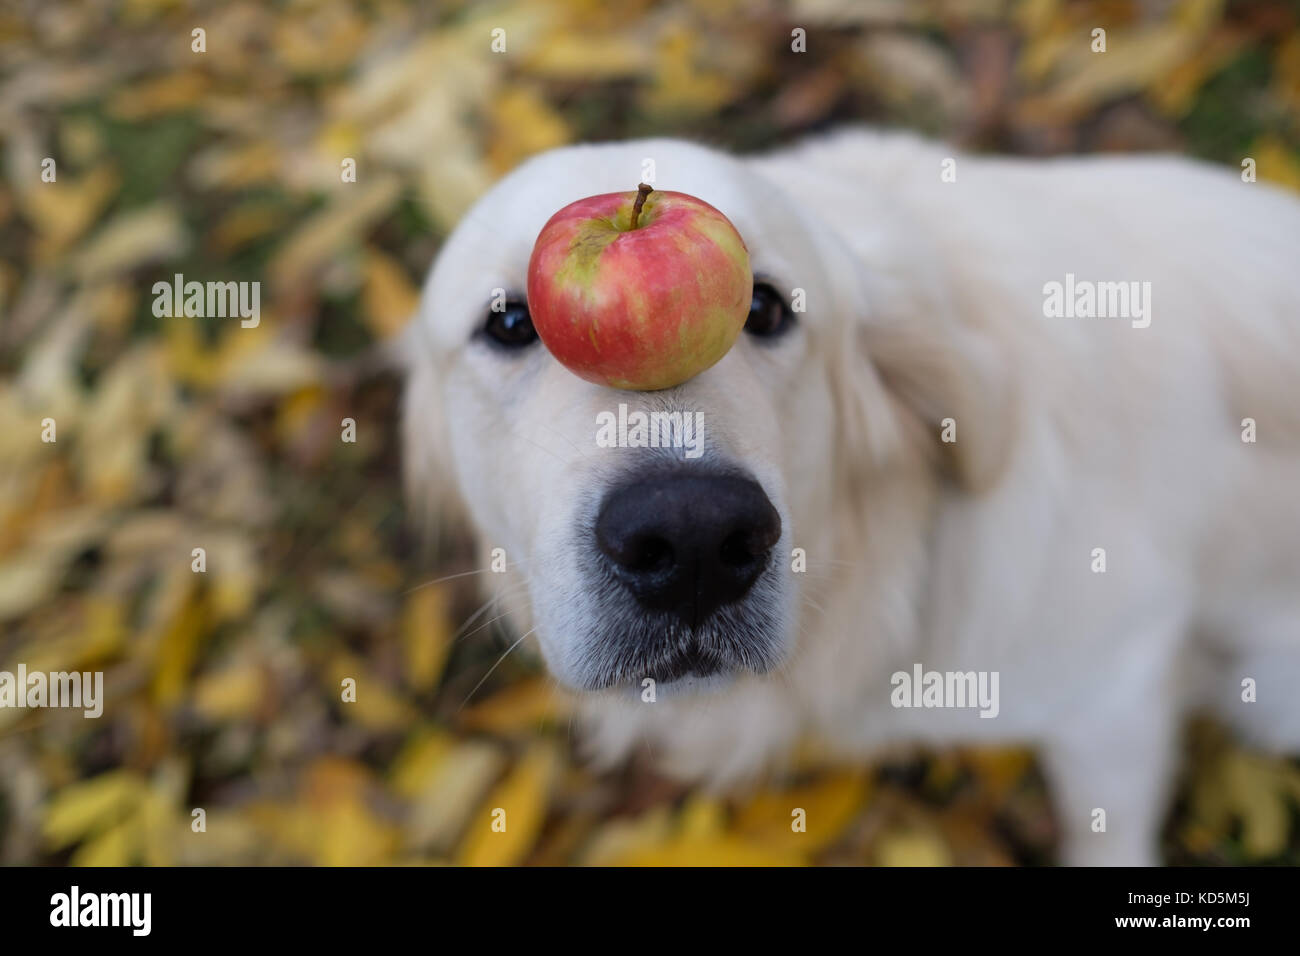 A golden retriever is holding an apple on his nose. Stock Photo